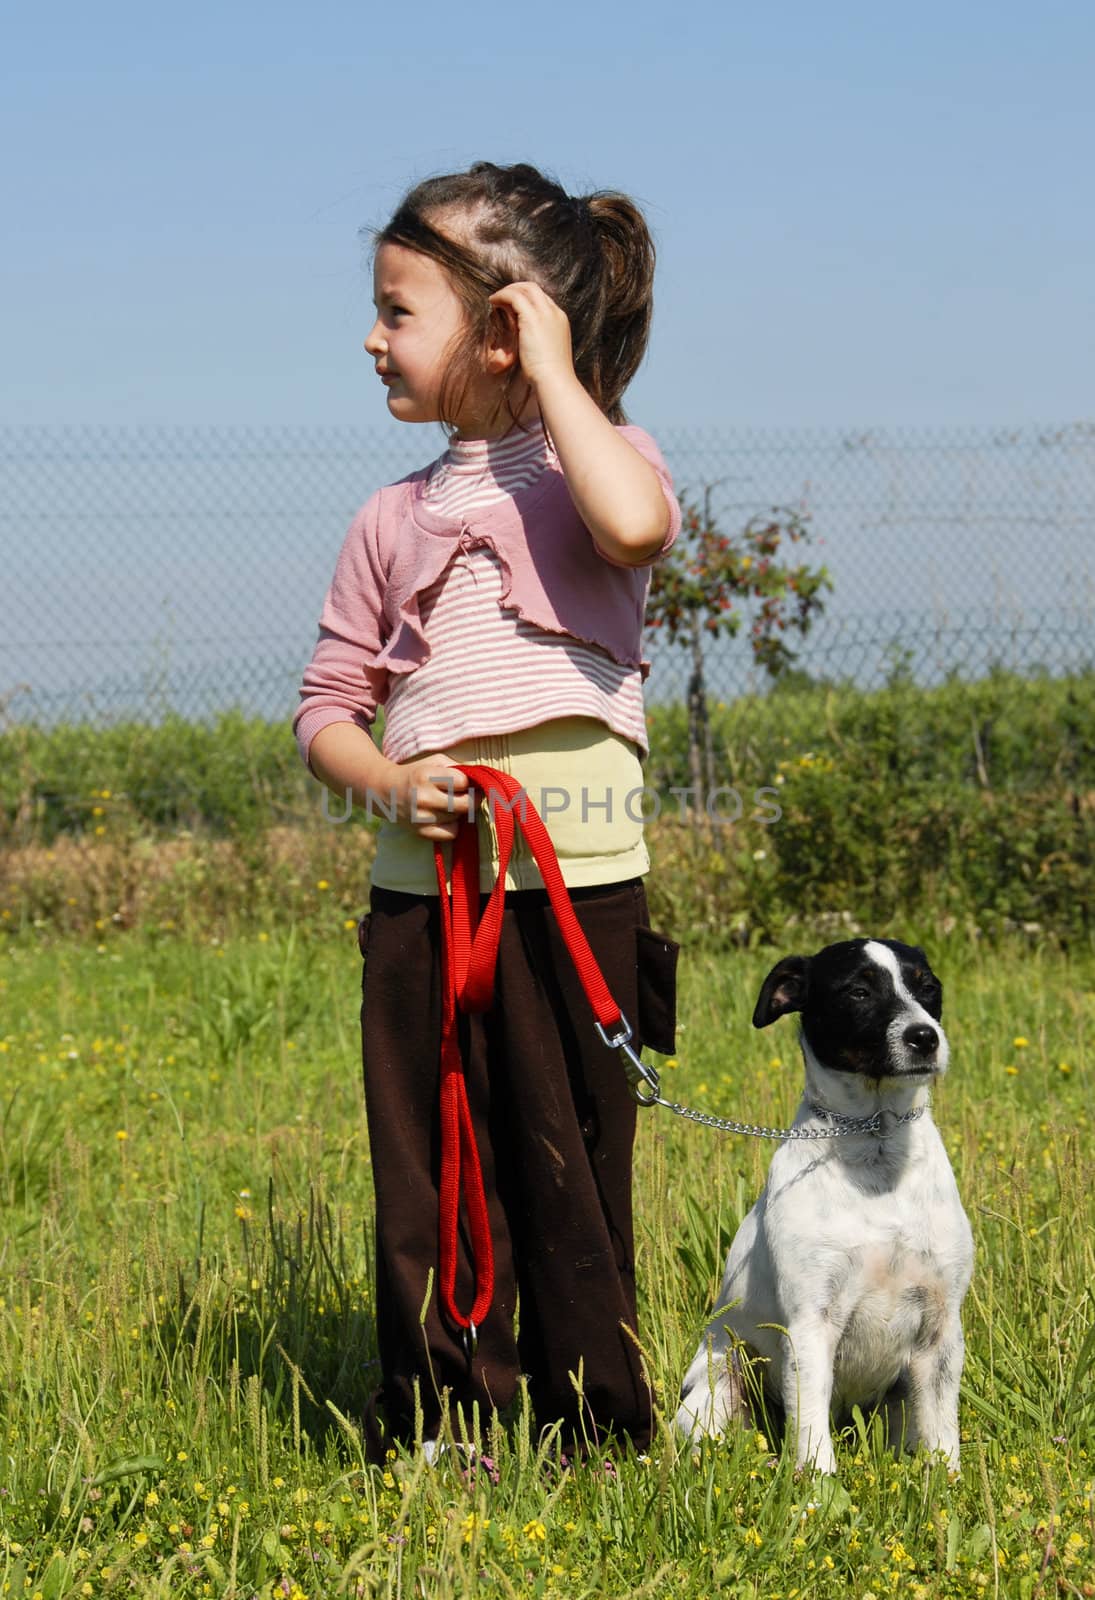 little girl and dog by cynoclub